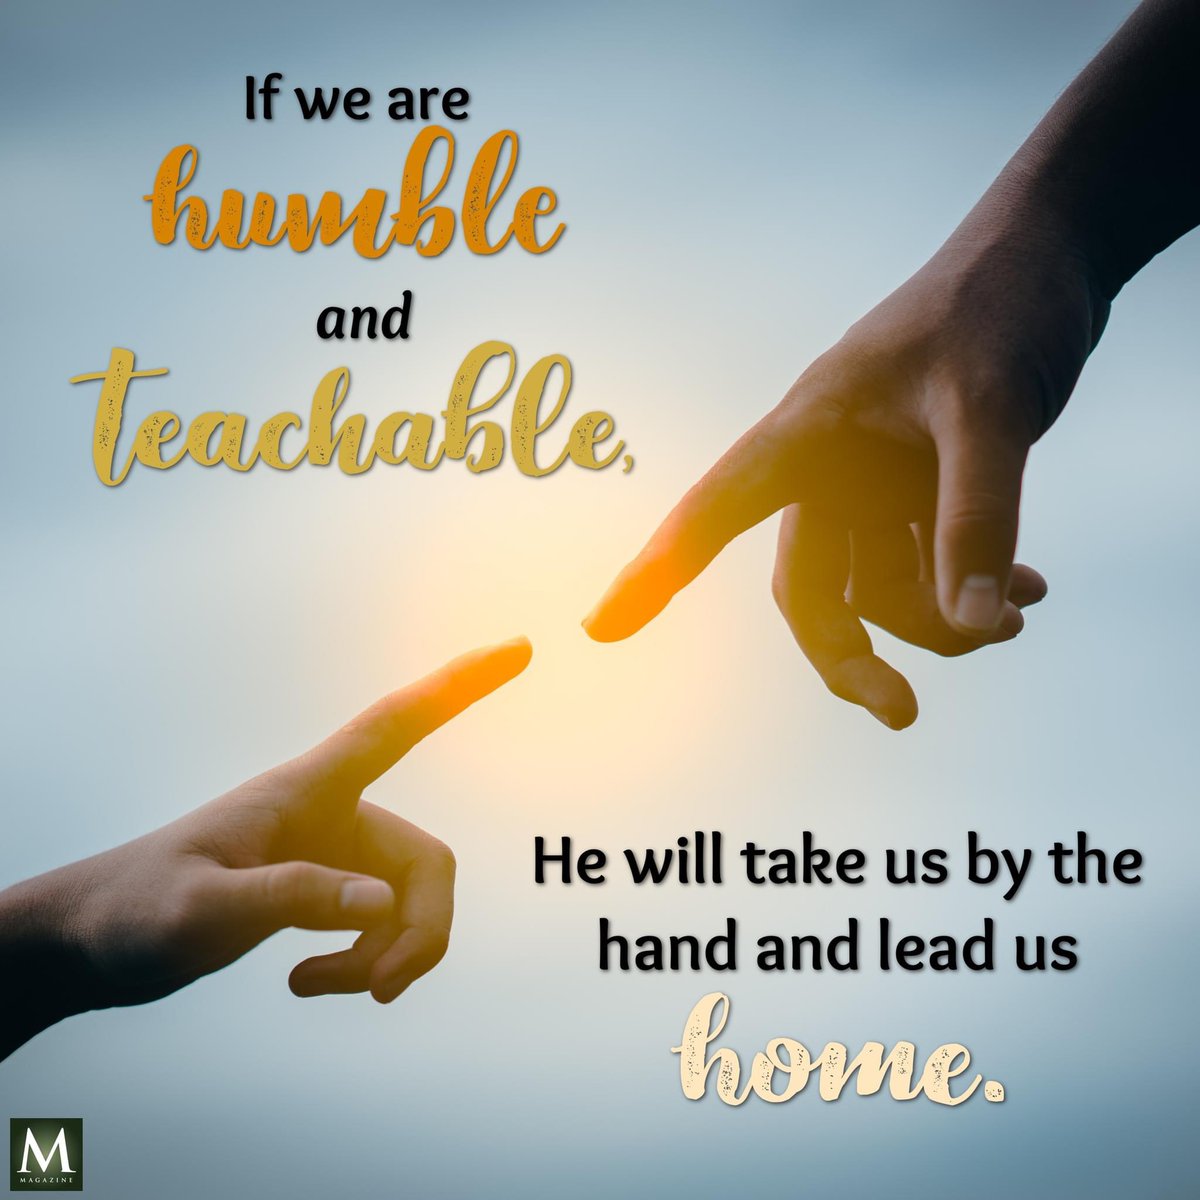 'If we are humble and teachable, He will take us by the hand and lead us home.' ~ Elder Larry R. Lawrence #TrustGod #CountOnHim #WordOfGod #HearHim #ComeUntoChrist #ShareGoodness #ChildrenOfGod #GodLovesYou #TheChurchOfJesusChristOfLatterDaySaints